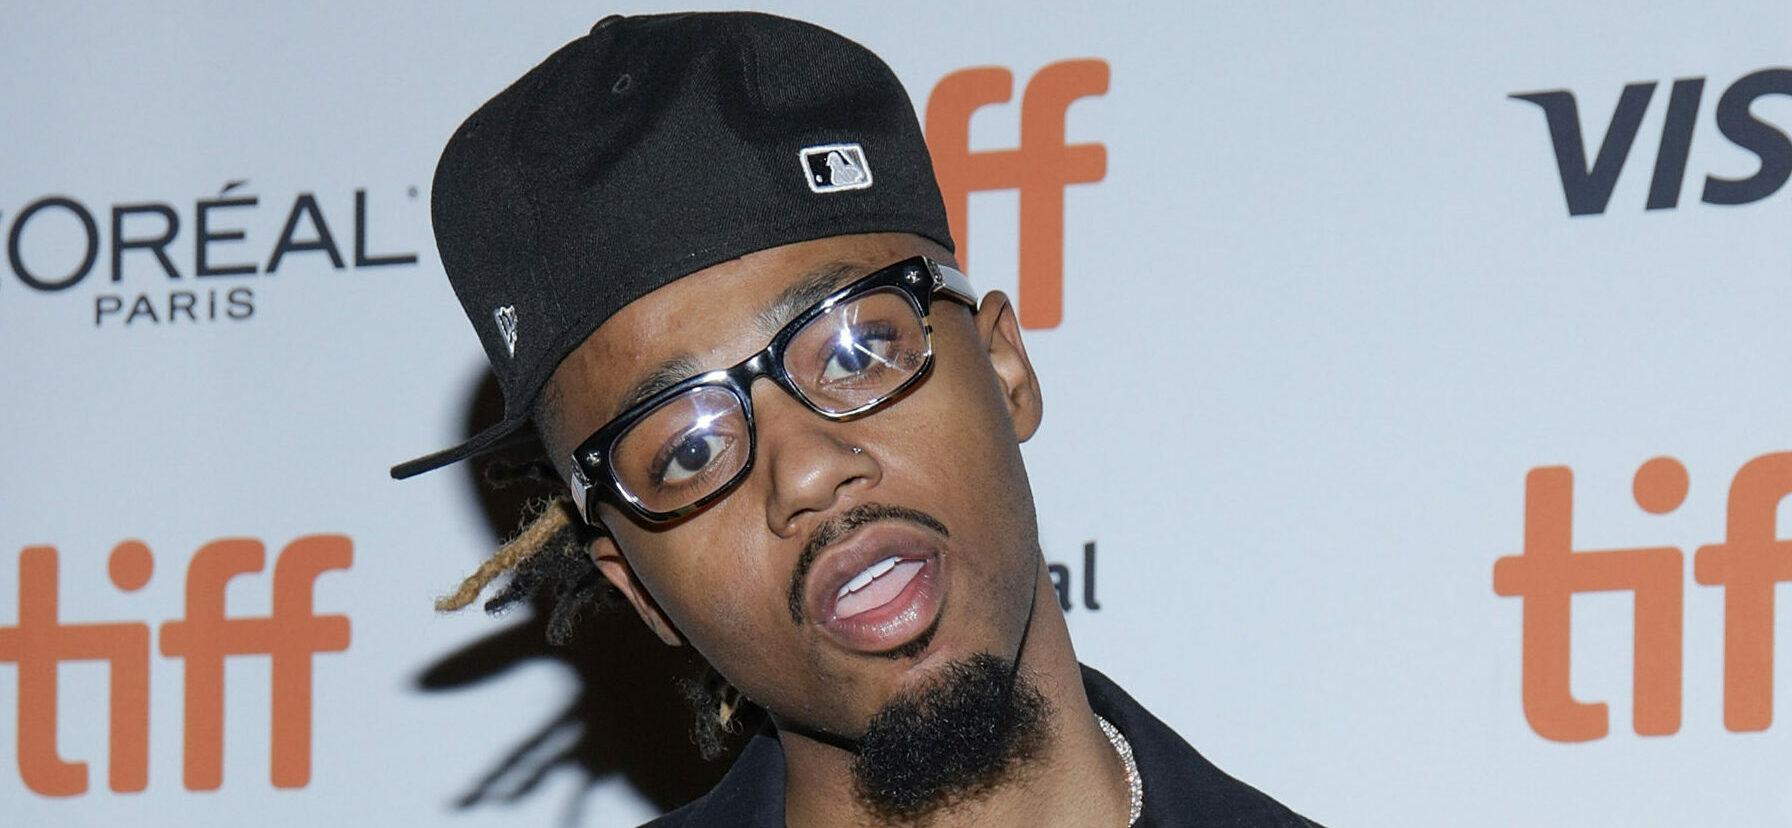 "Uncut Gems"premiere during the 2019 Toronto International Film Festival at Princess of Wales Theatre on September 09, 2019 in Toronto, Canada. Photo: PICJER/imageSPACE. 09 Sep 2019 Pictured: Metro Boomin.